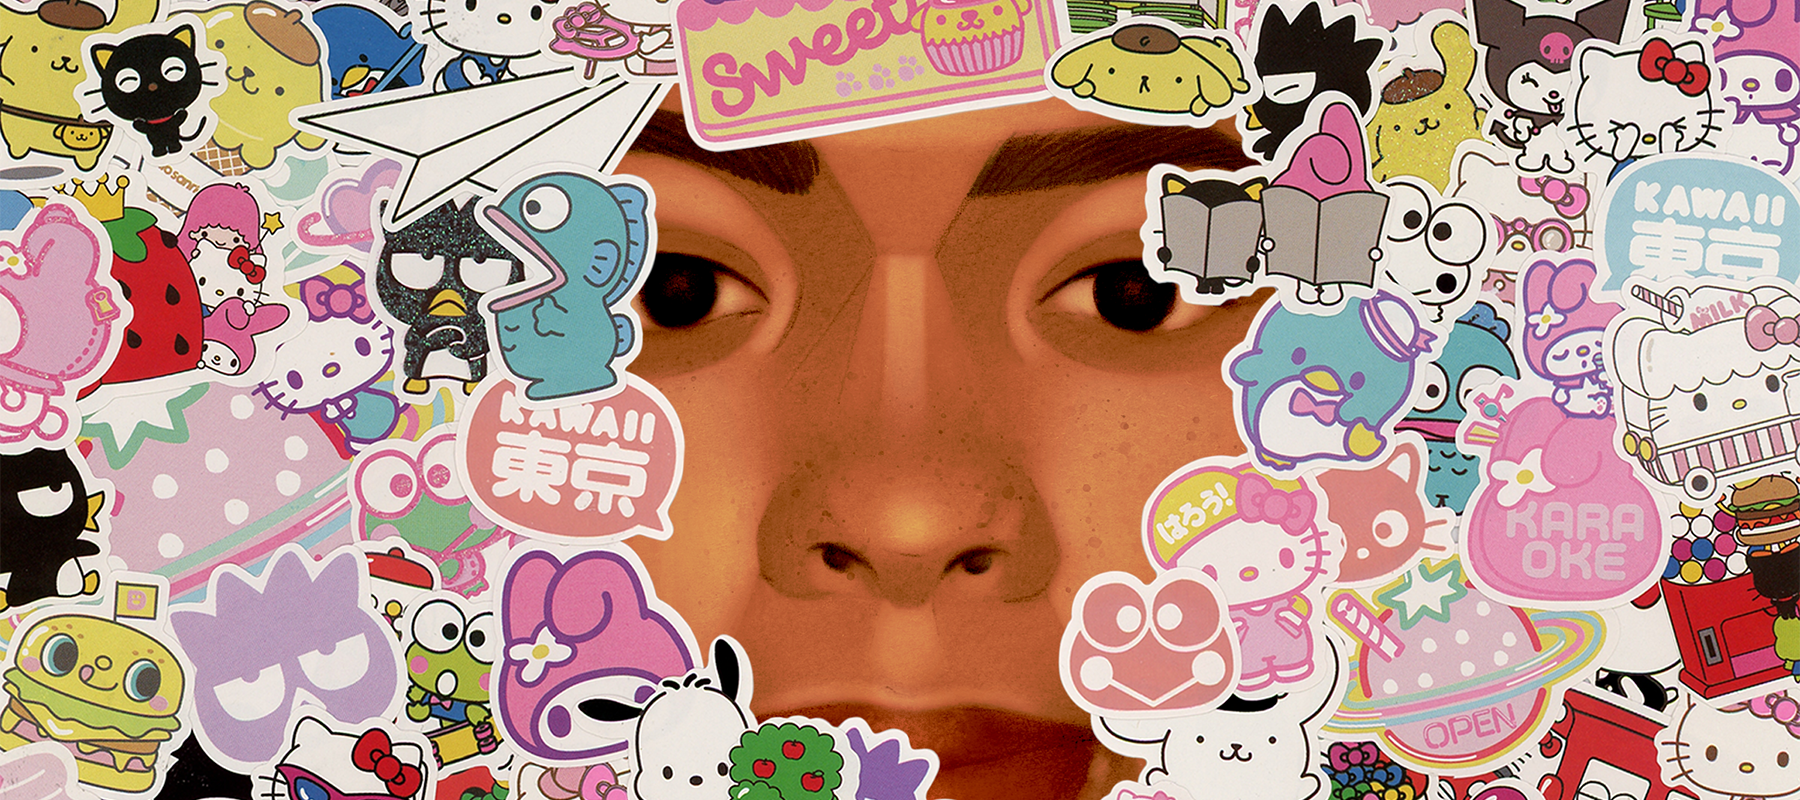 A young woman's face is partially obscured by pop culture stickers of various characters including Hello Kitty.